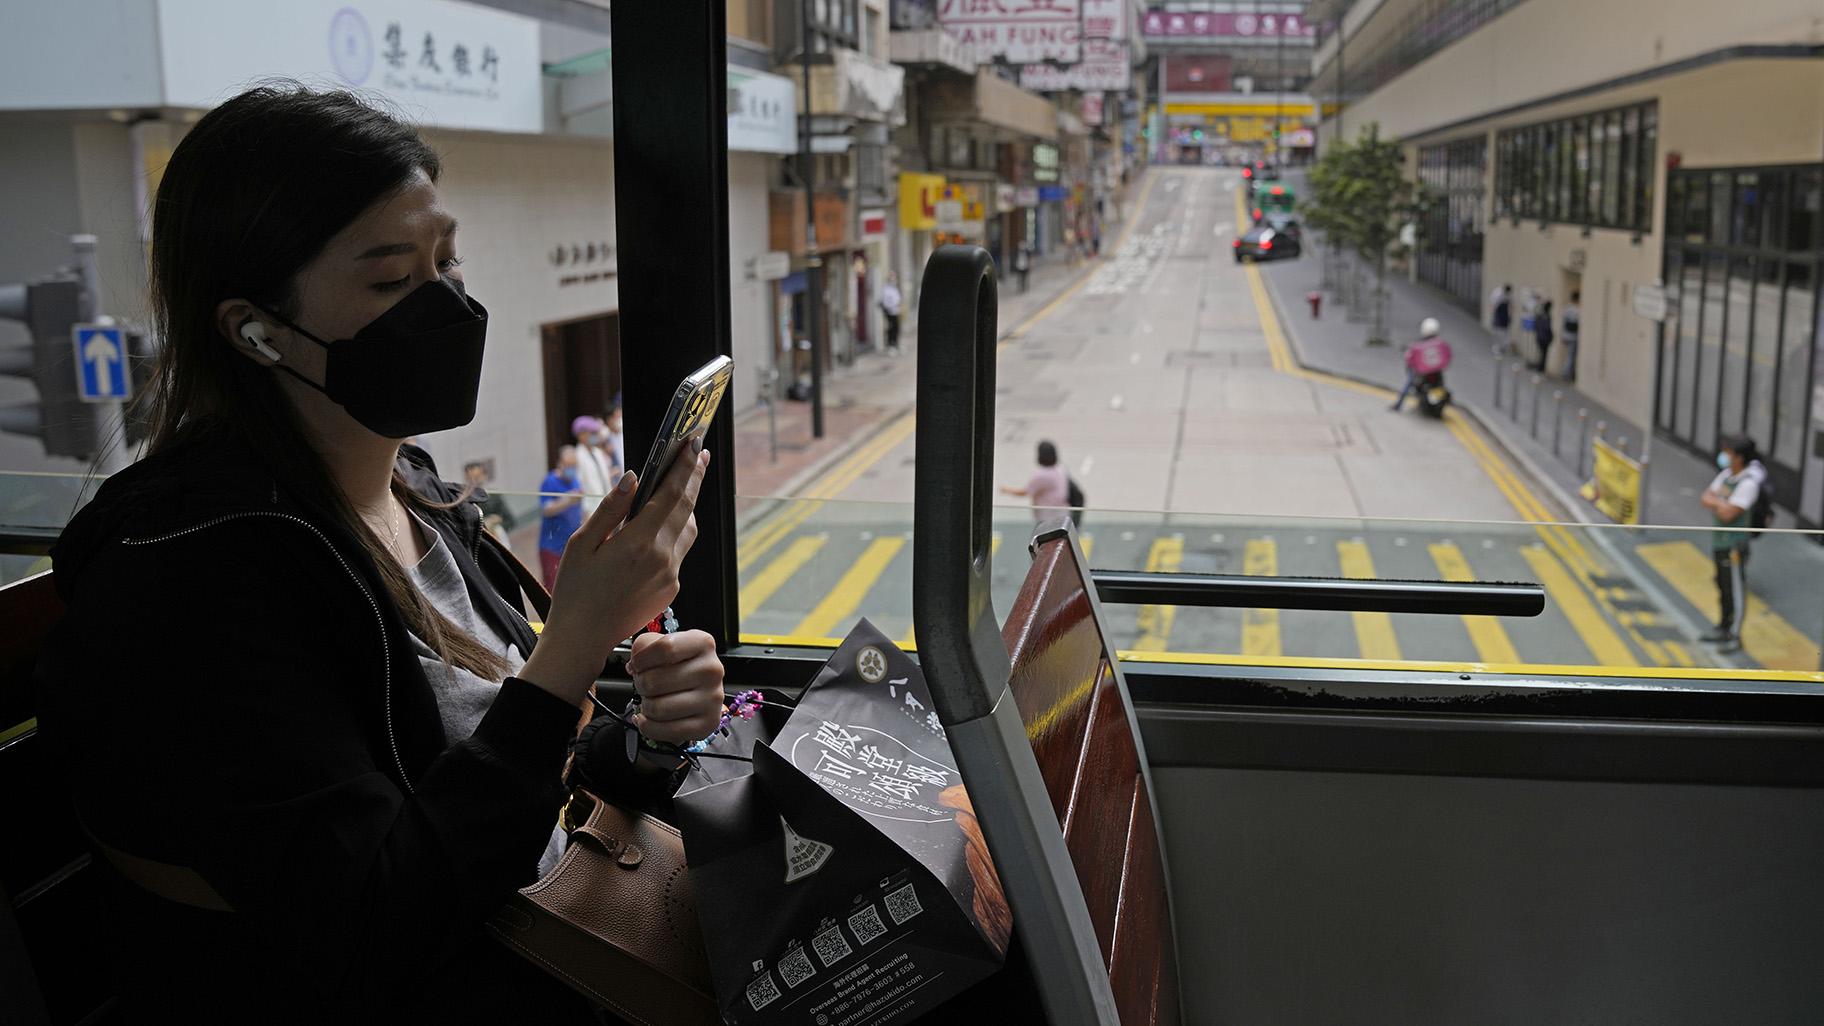 A woman wearing a face mask rides on a tram in Hong Kong, Wednesday, March 16, 2022. (AP Photo / Kin Cheung)